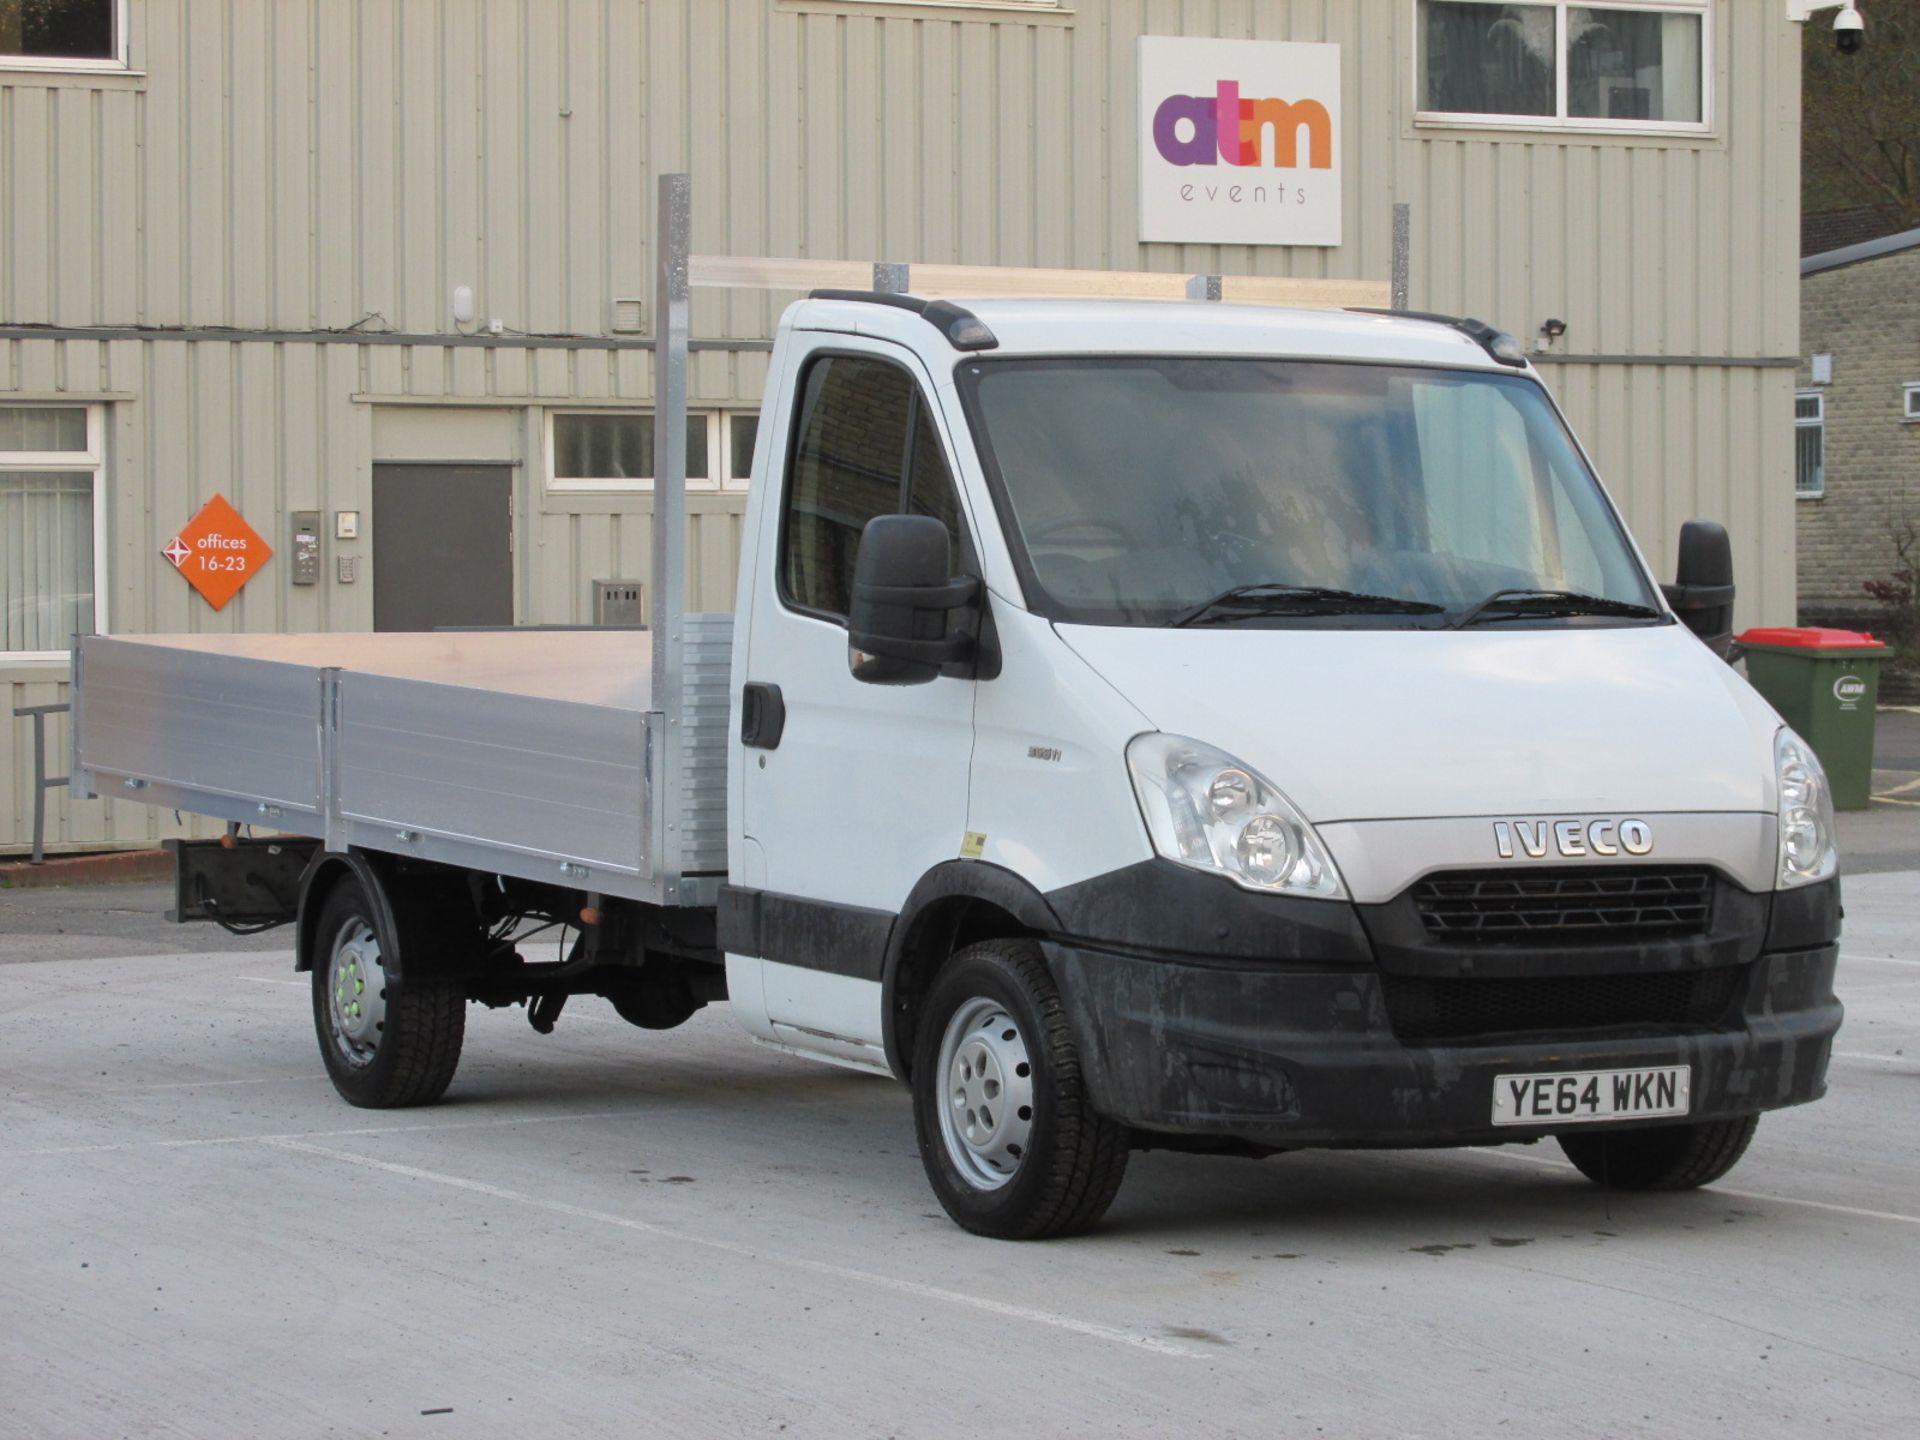 2014 Iveco Daily YE64 WKN - Image 5 of 10